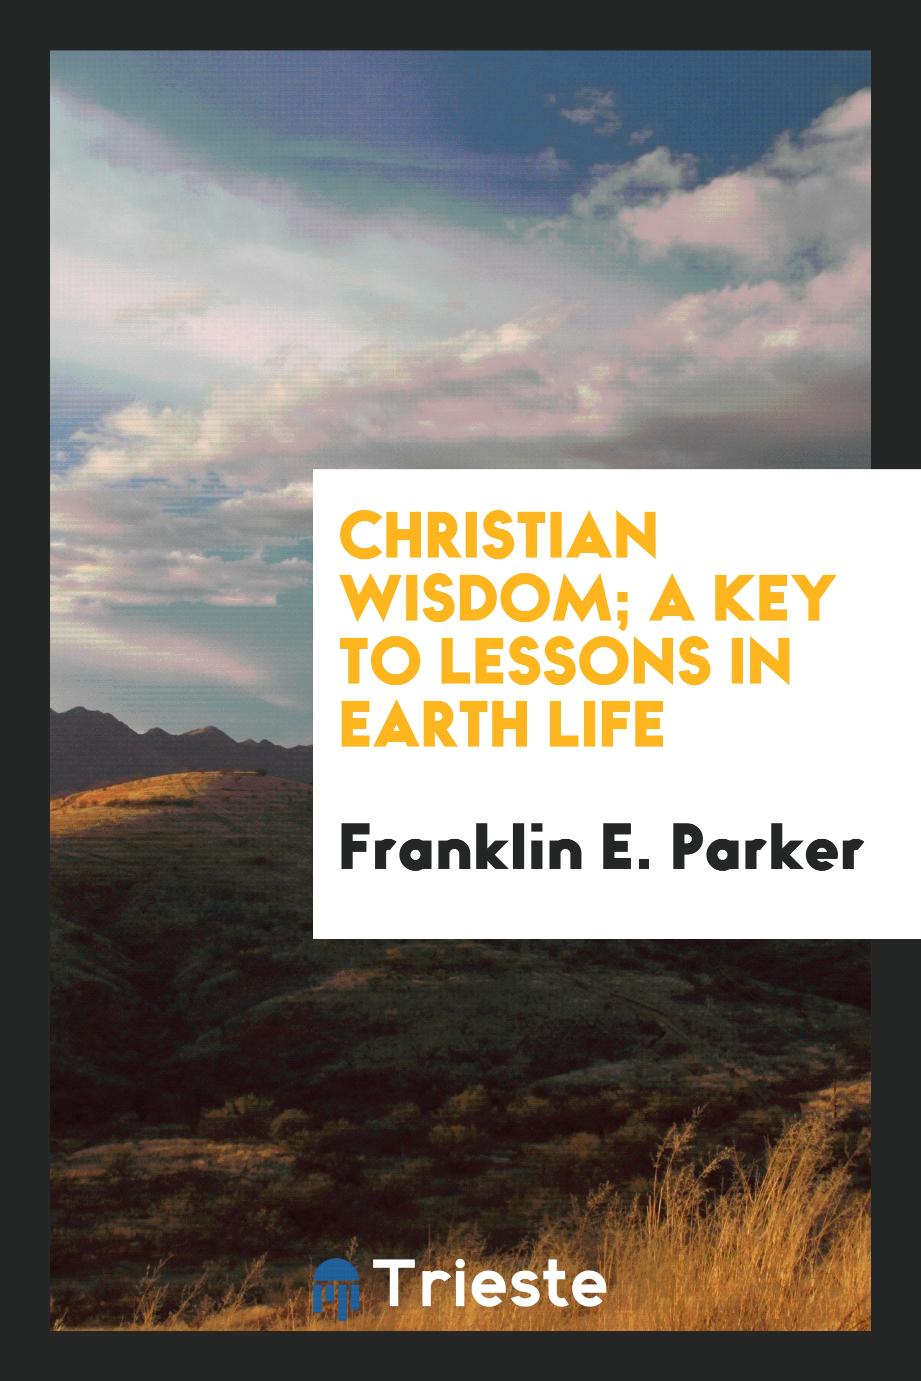 Christian wisdom; a key to lessons in earth life